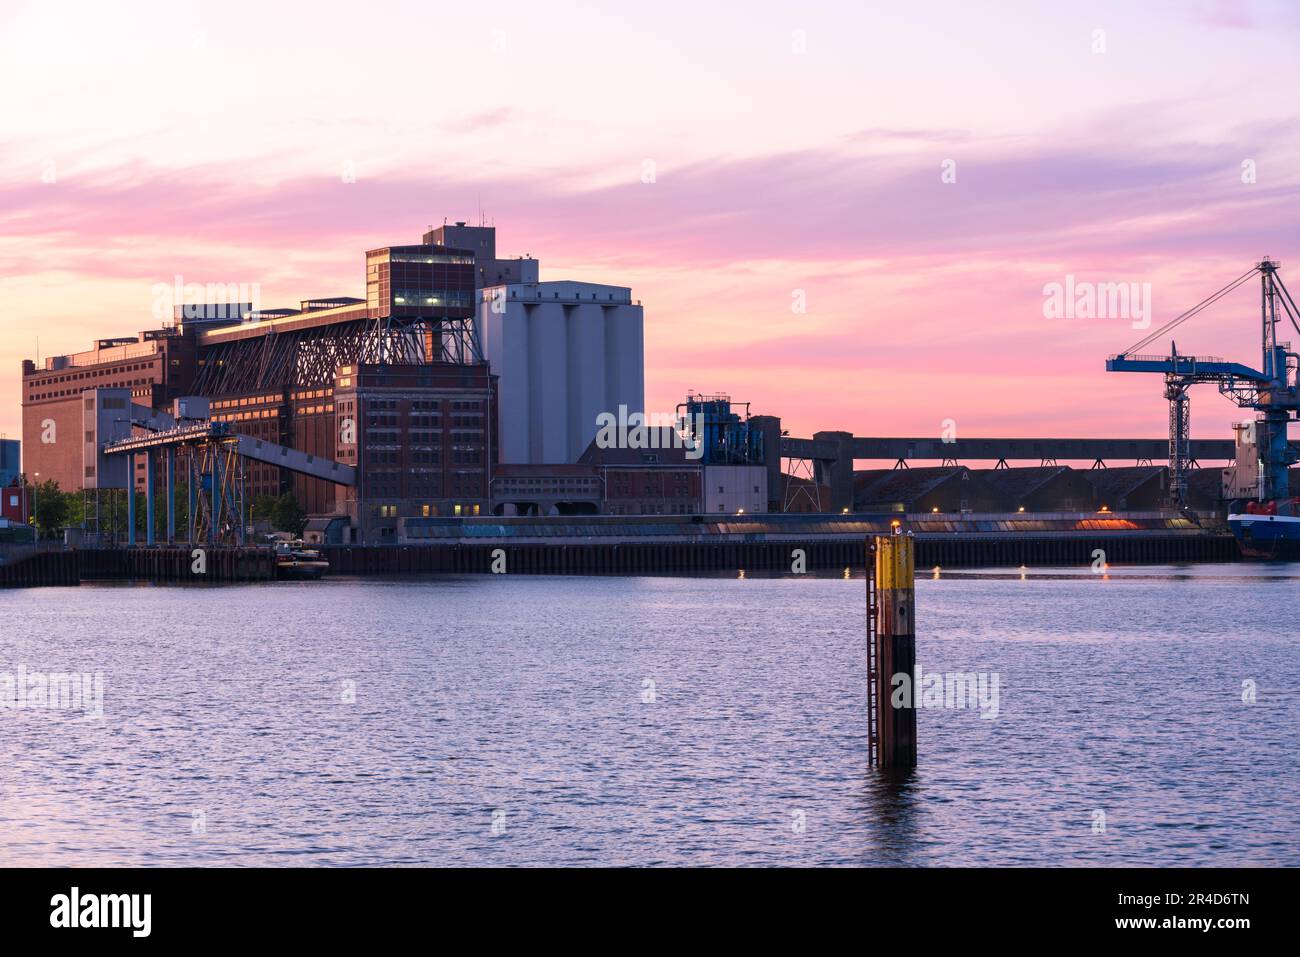 Warhouses and silos on a commercial dock on a river harbour at dusk in summer Stock Photo